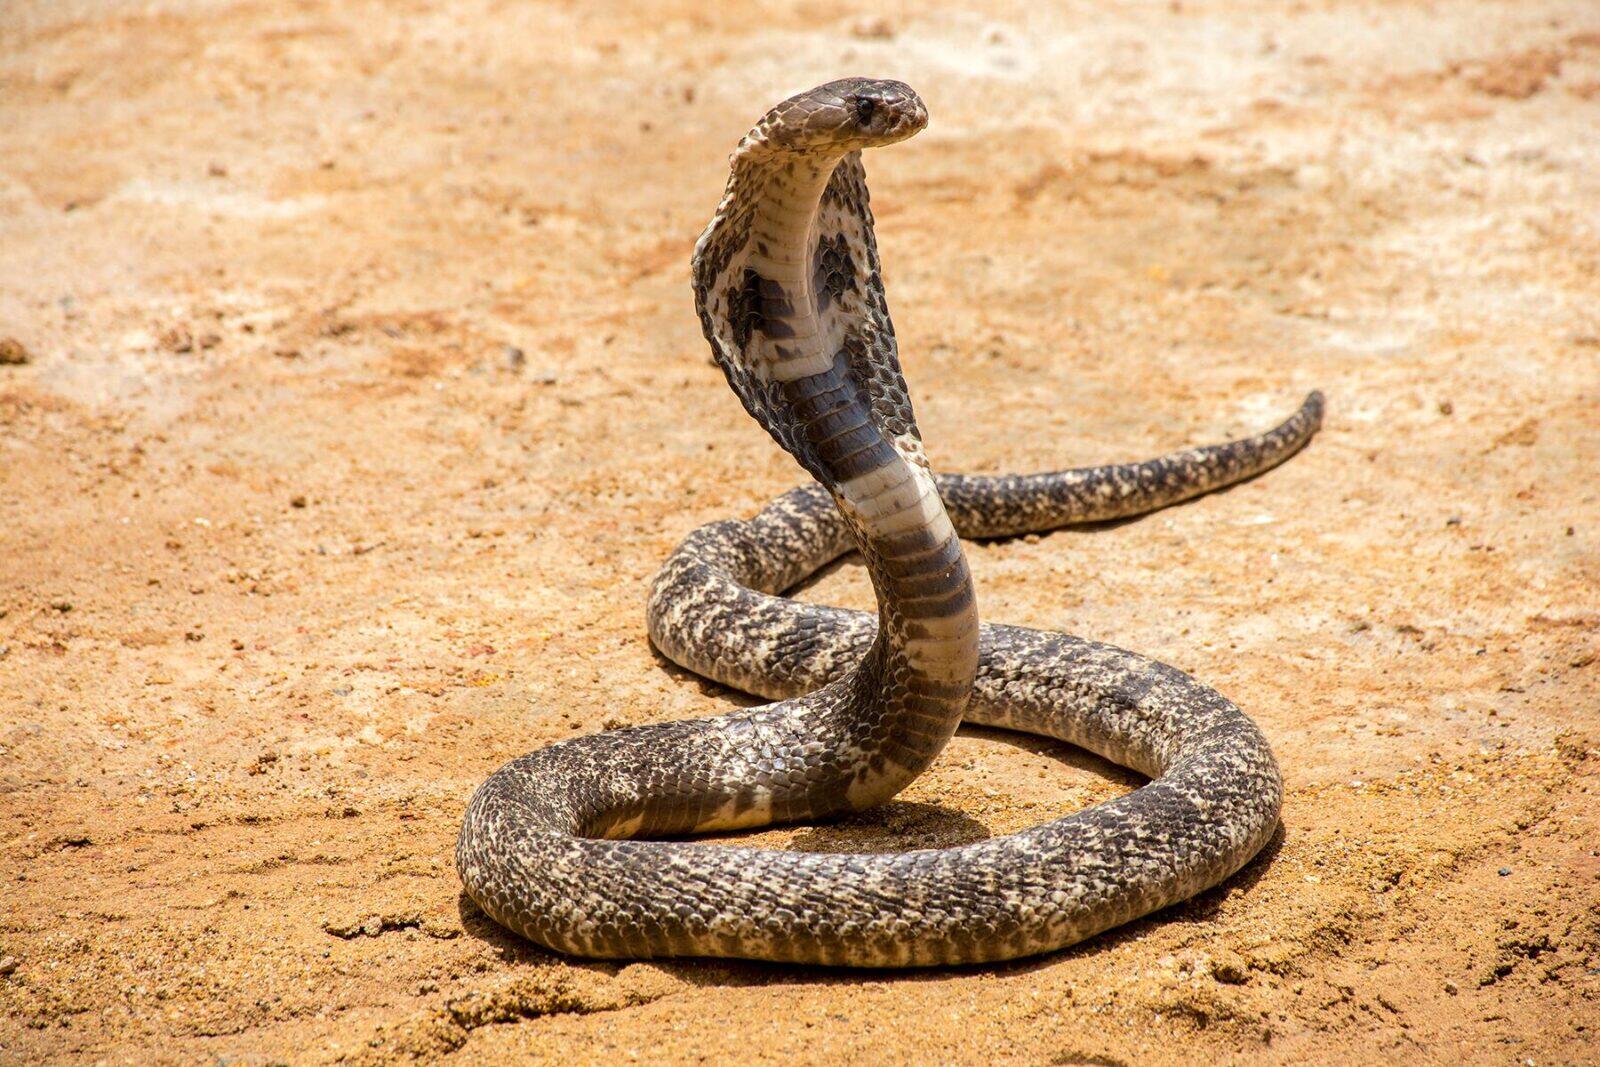 What Are the Most Poisonous Snakes in the World?